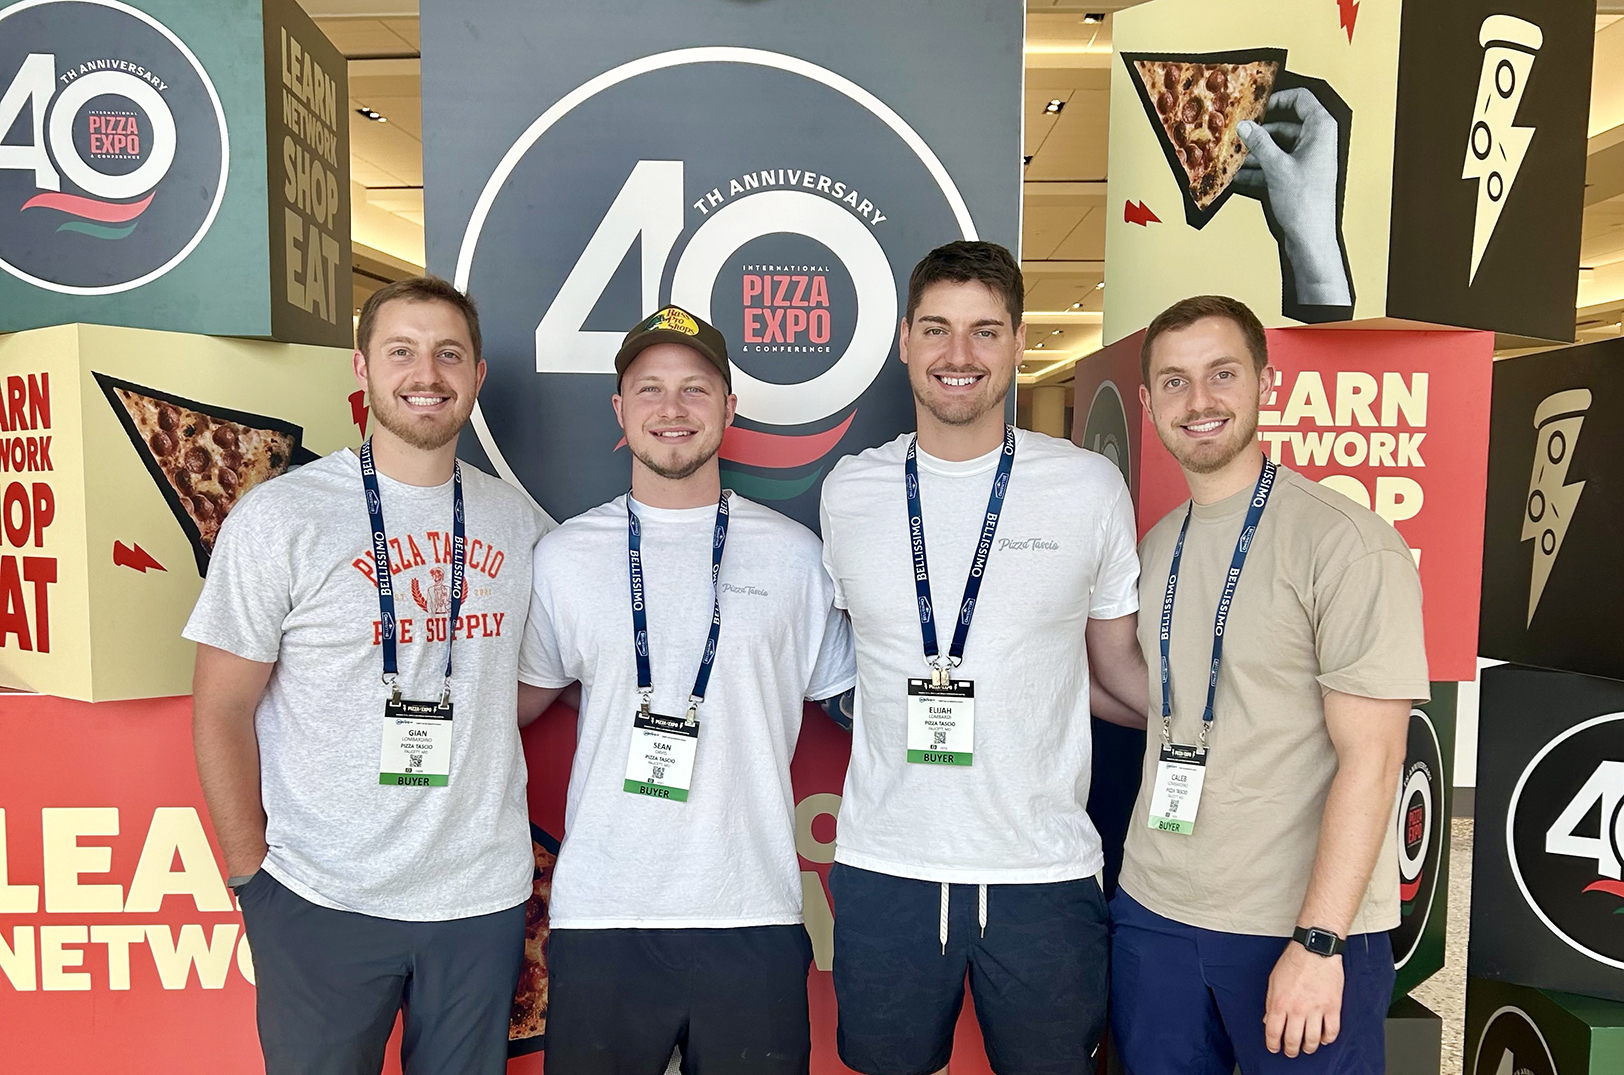 Topping expectations: These brothers helped expand Pizza Tascio to 8 locations; now they’re taking over